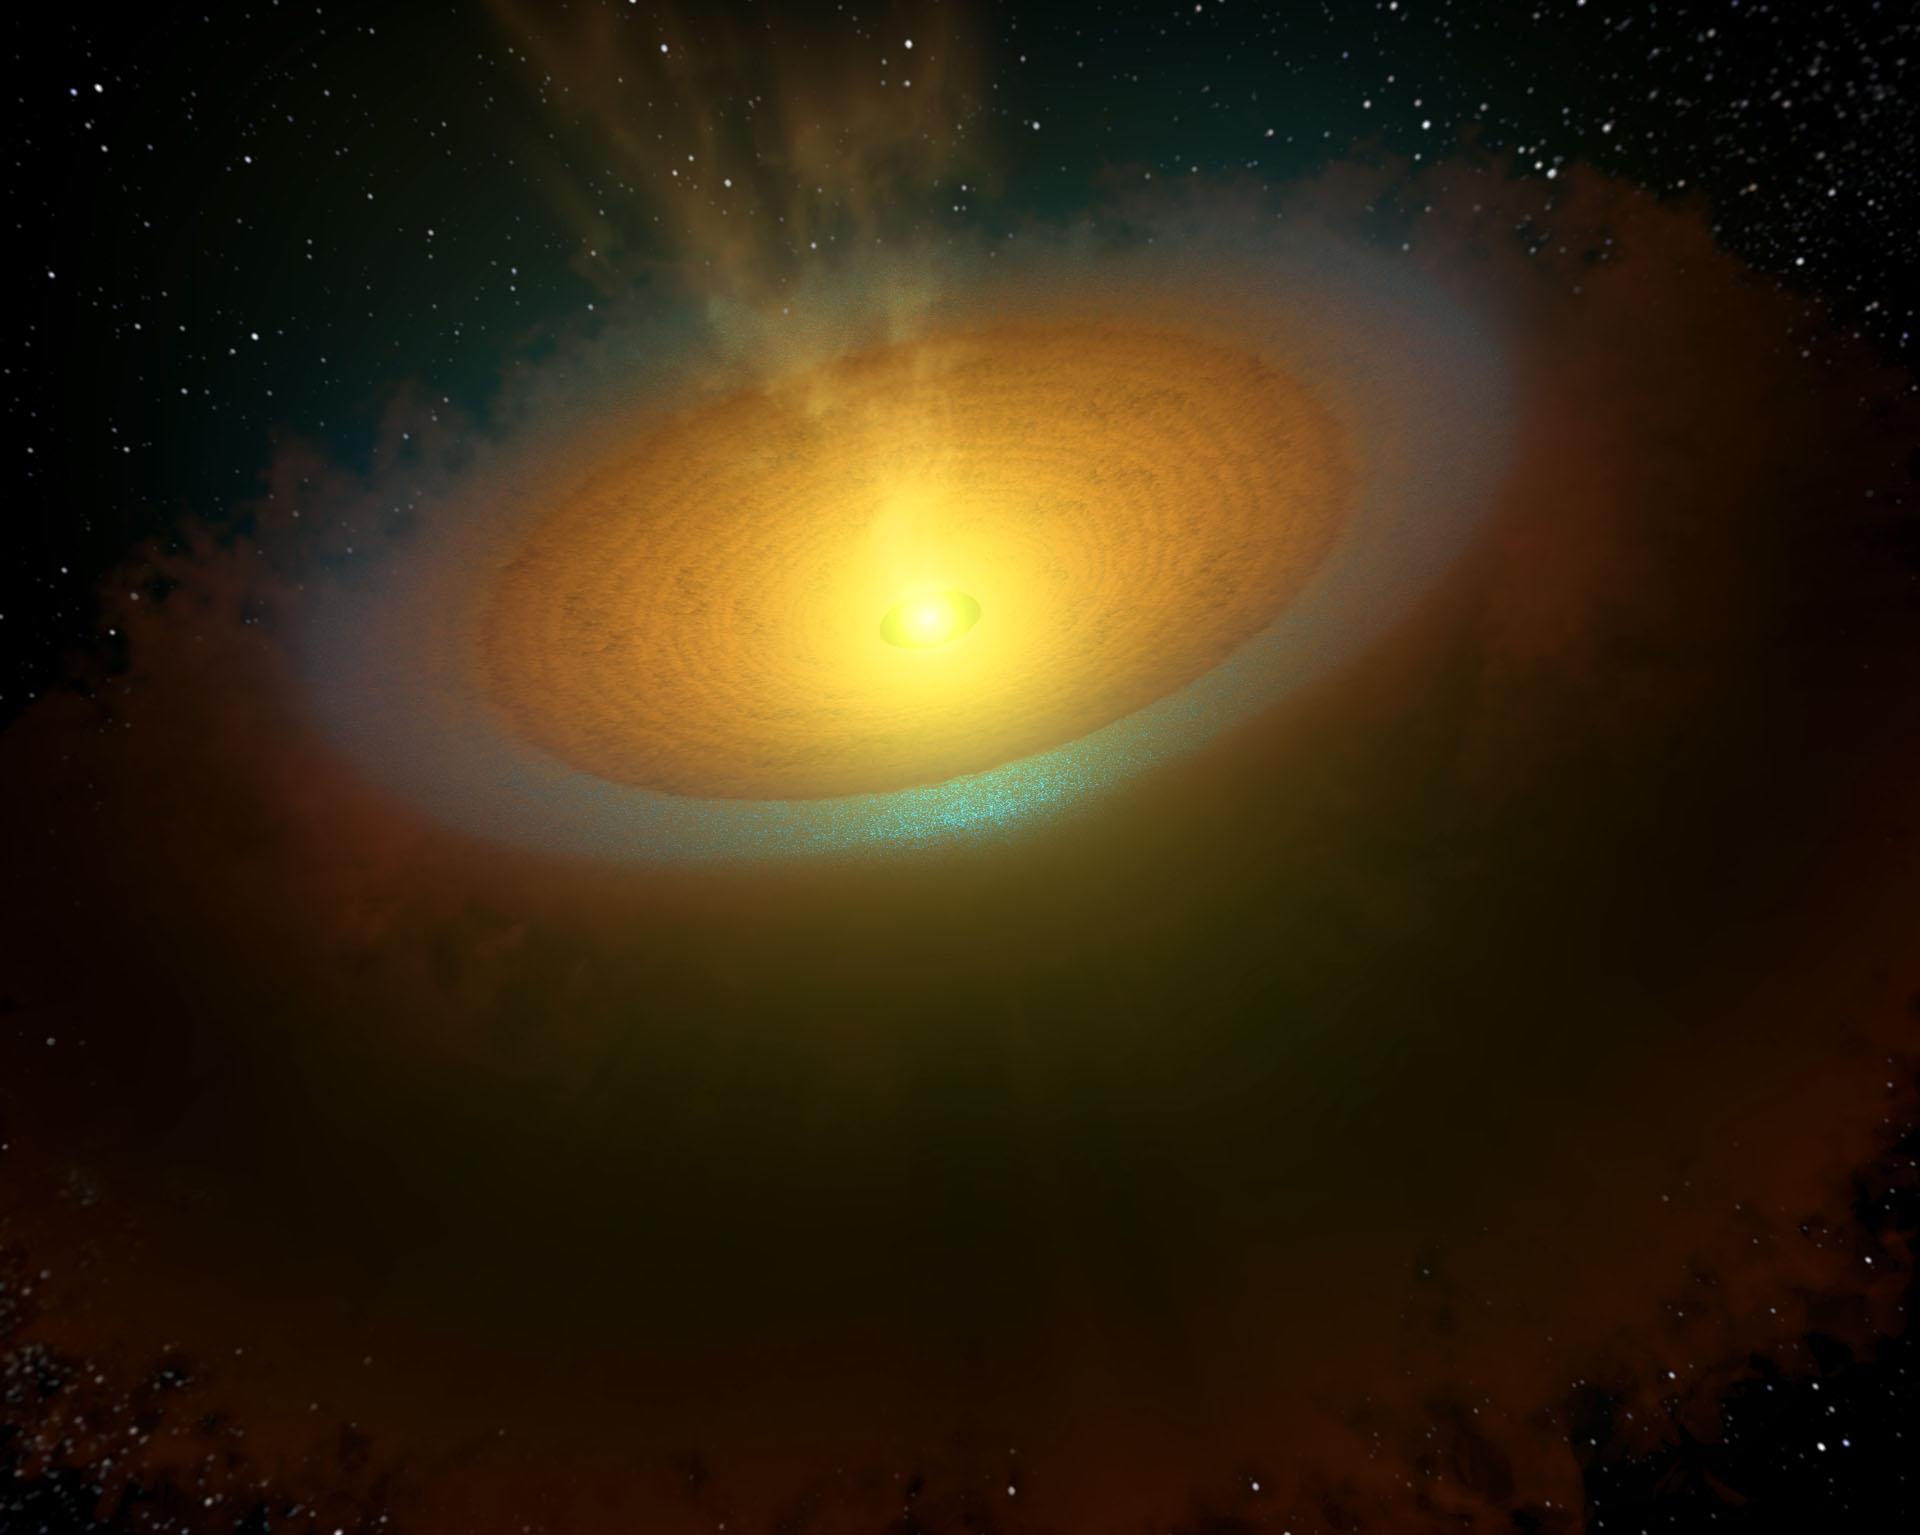 Artist's impression of the protoplanetary disc around the young star TW Hydrae. Copyright: ESA/NASA/JPL-Caltech 